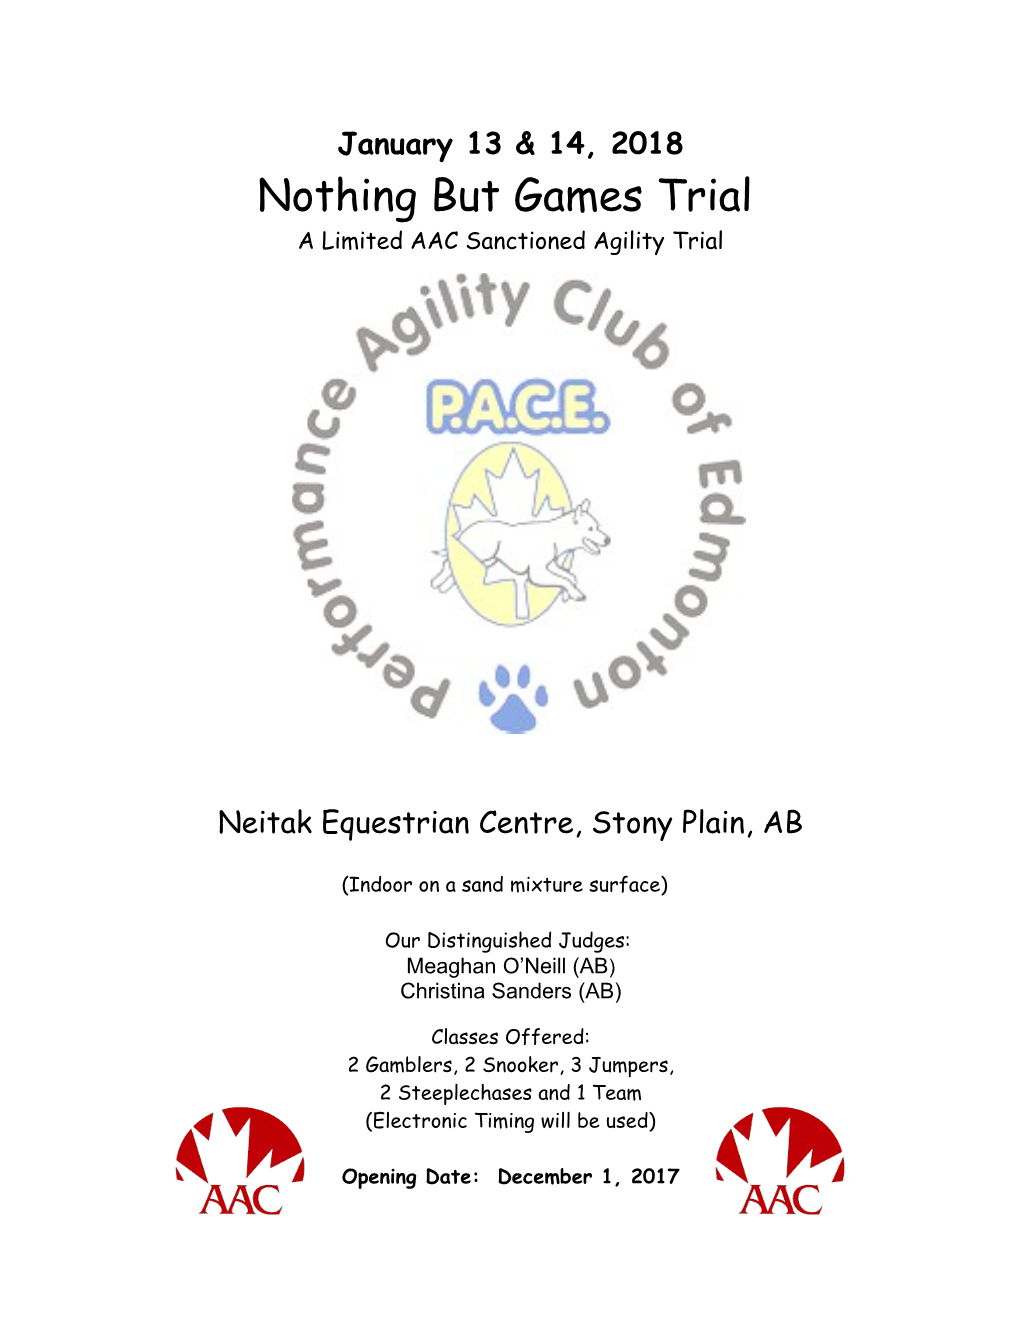 A Limited AAC Sanctioned Agility Trial